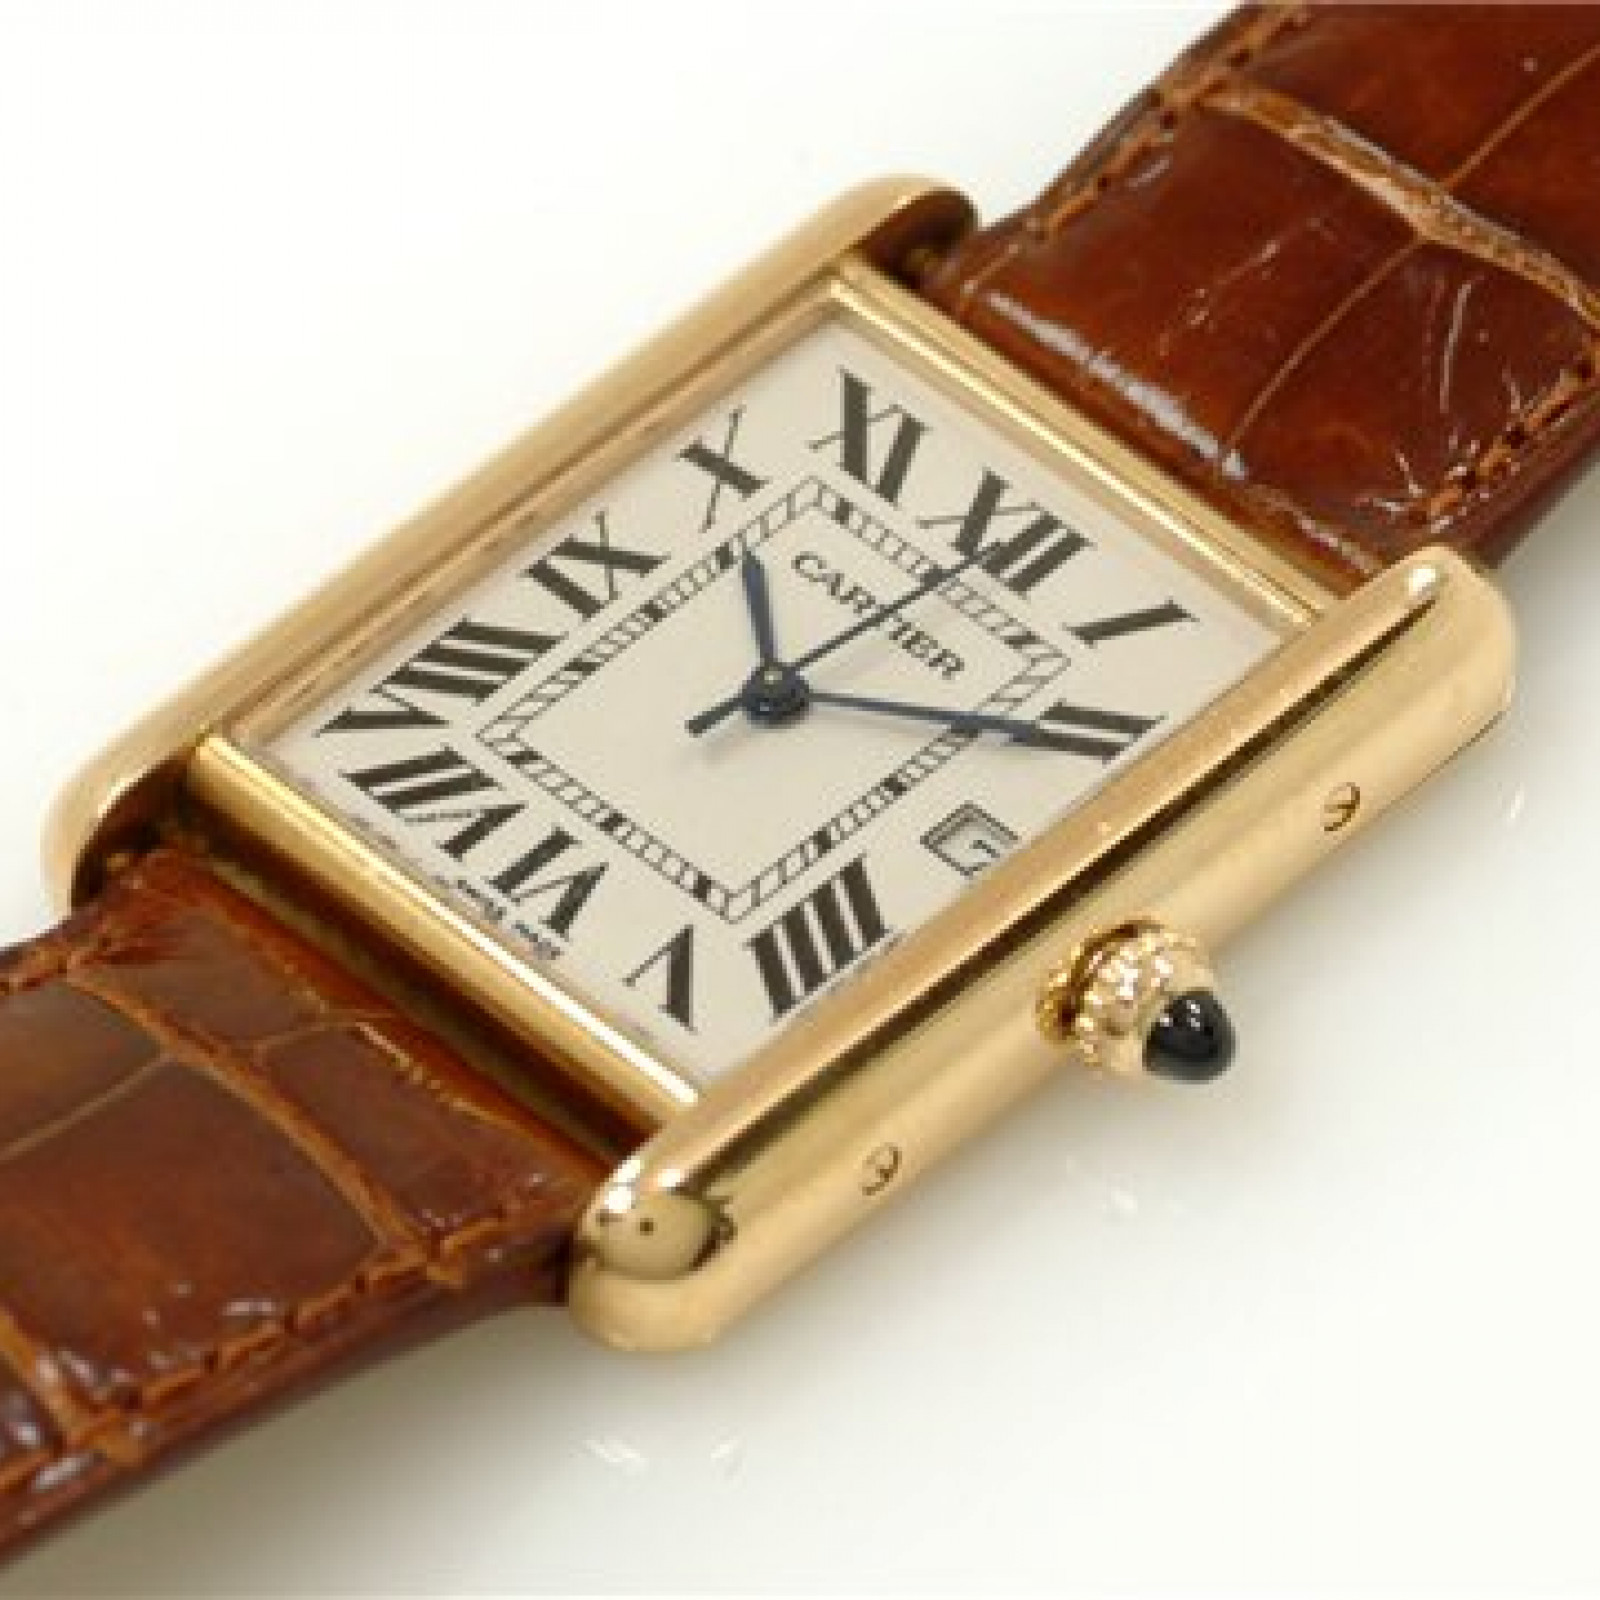 Sell Cartier Tank Louis W1529756 Used